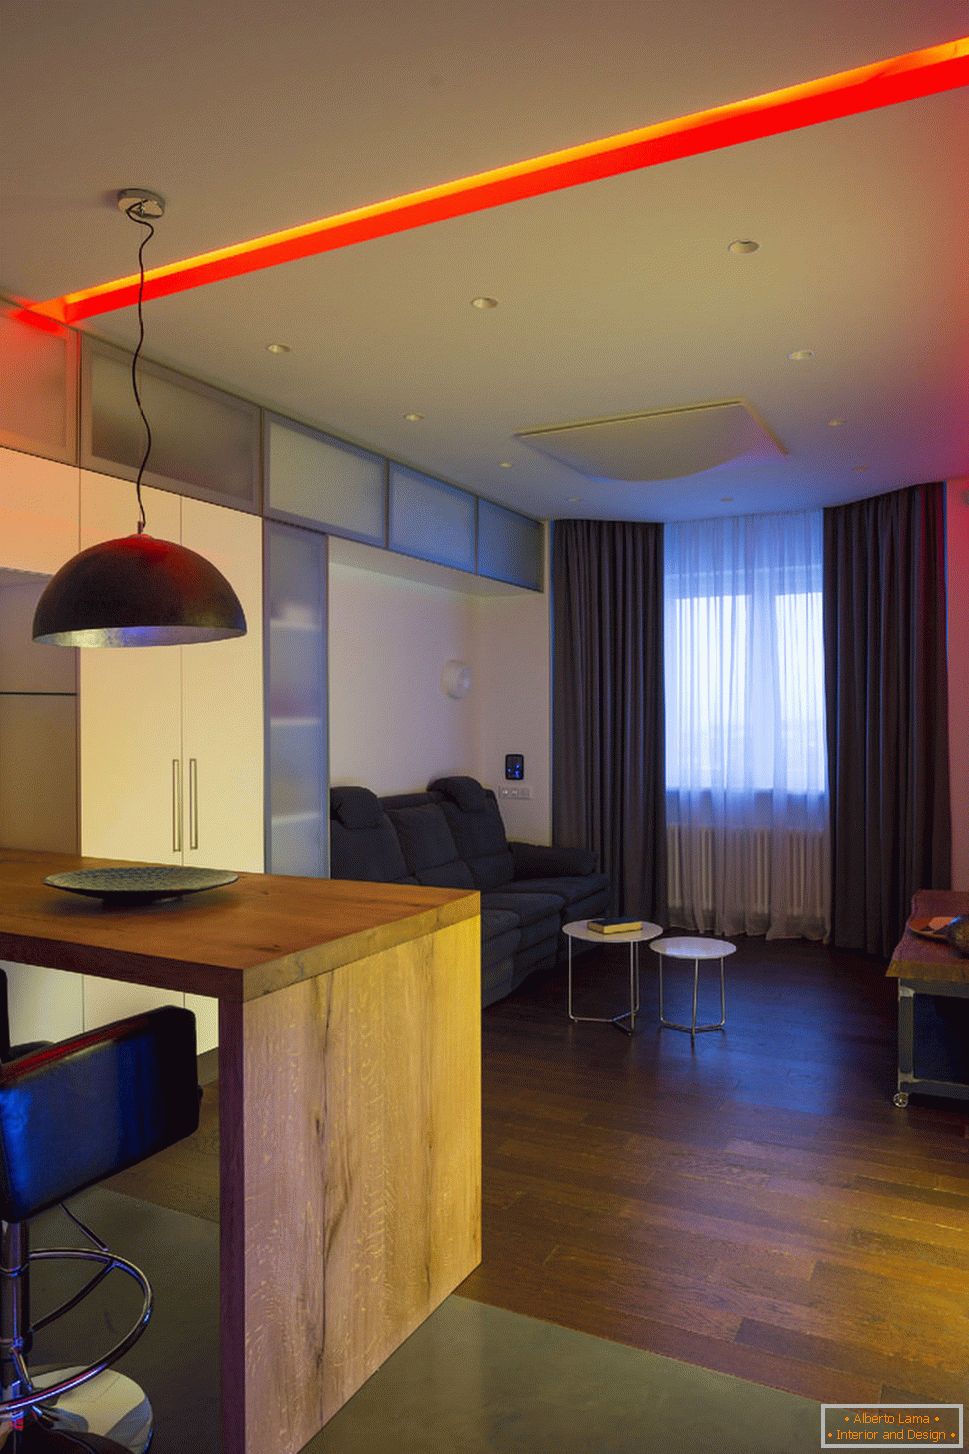 Interior of the apartment with controlled lighting